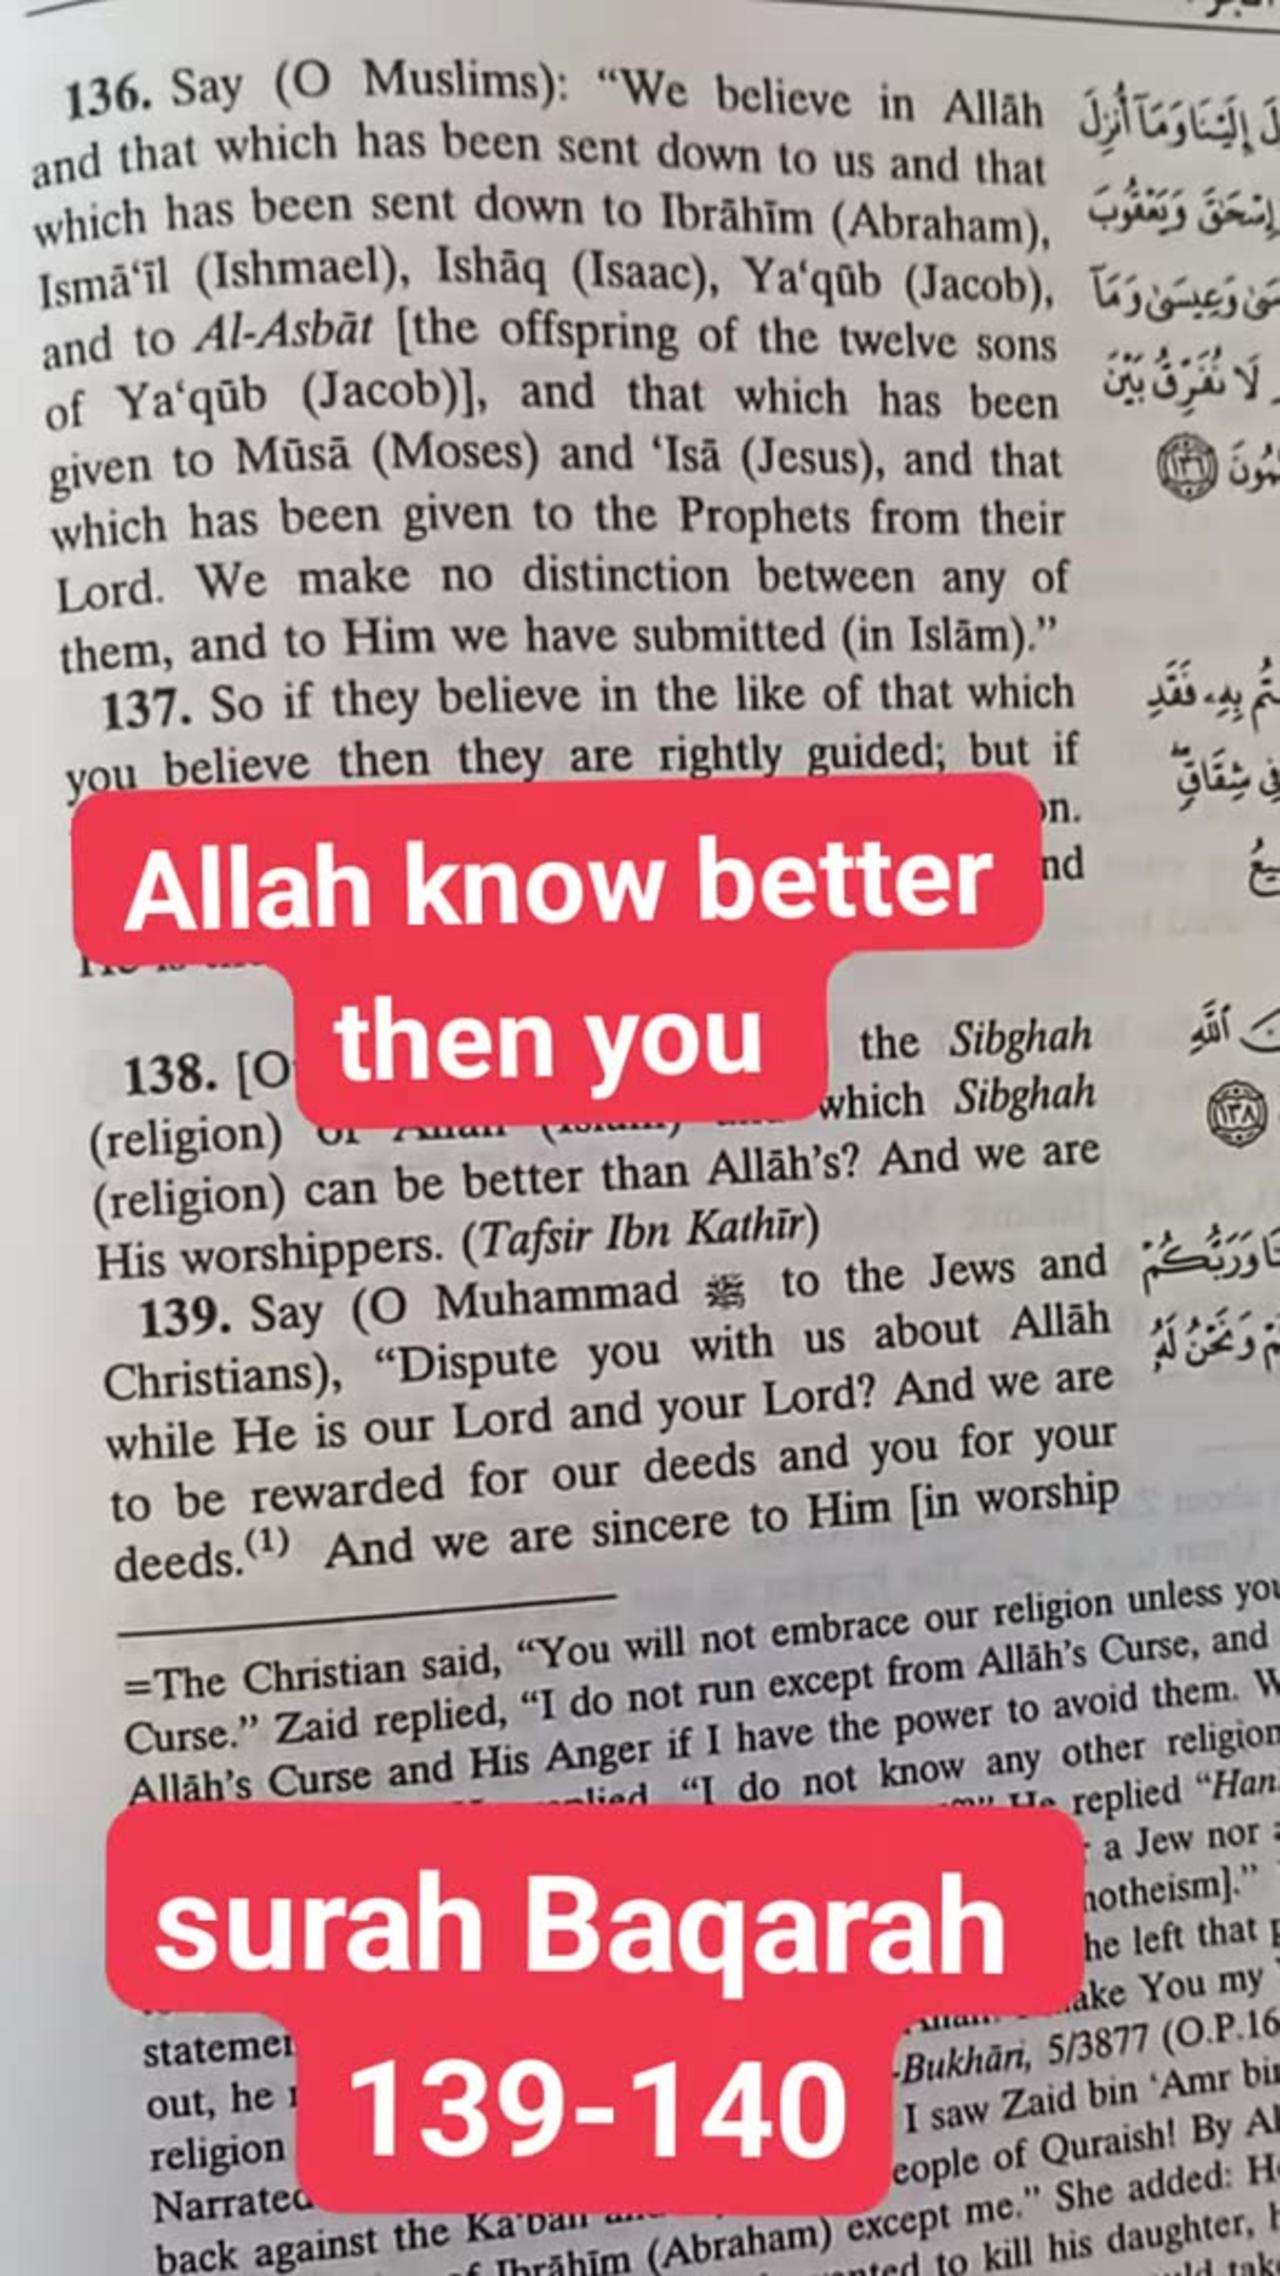 Allah knows better than you